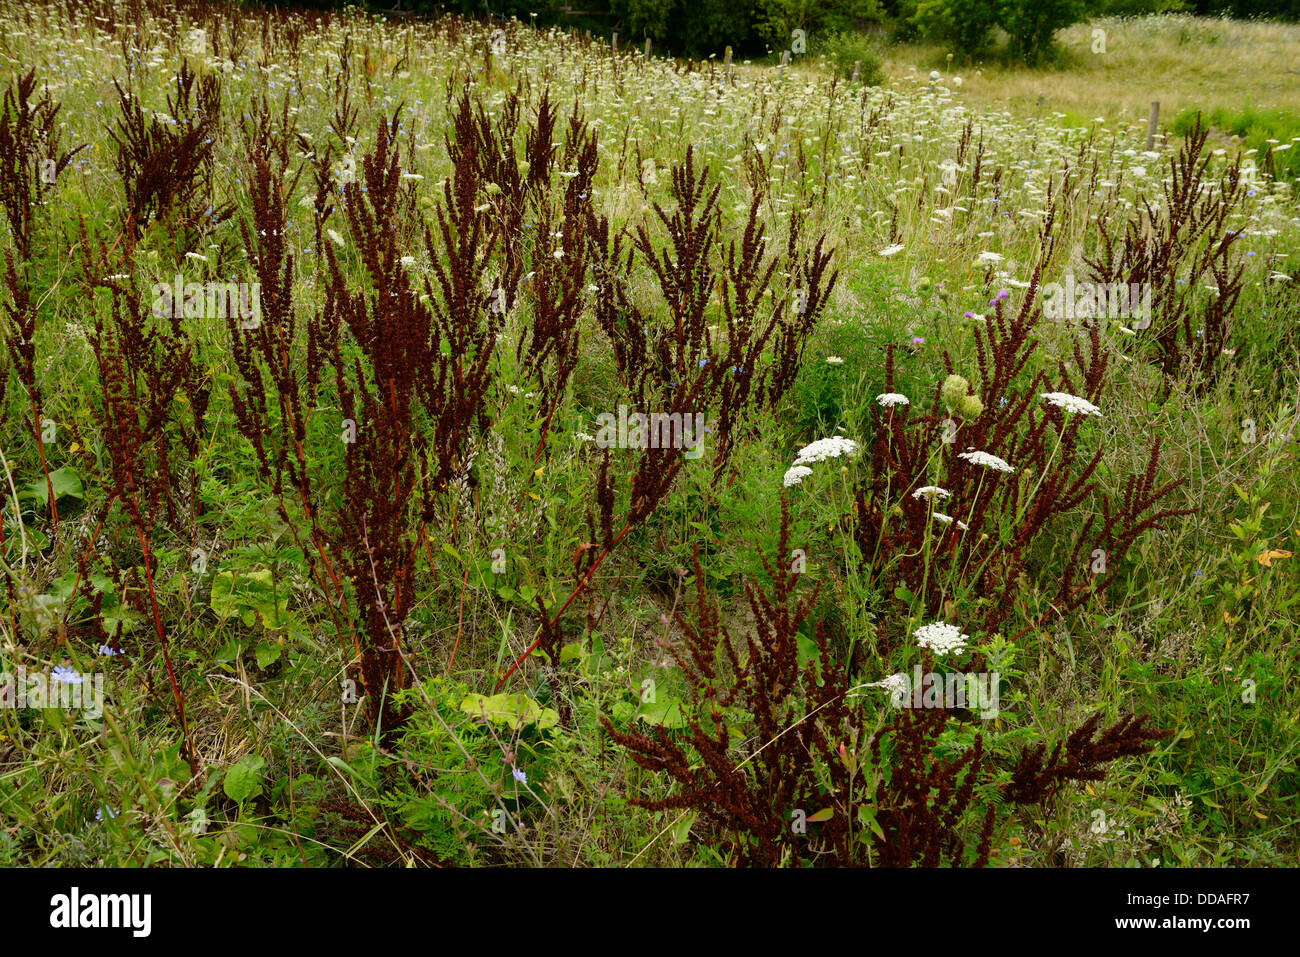 Fallow field grazed by horses leaving Dock and Queen Annes Lace weeds Ontario Canada Stock Photo